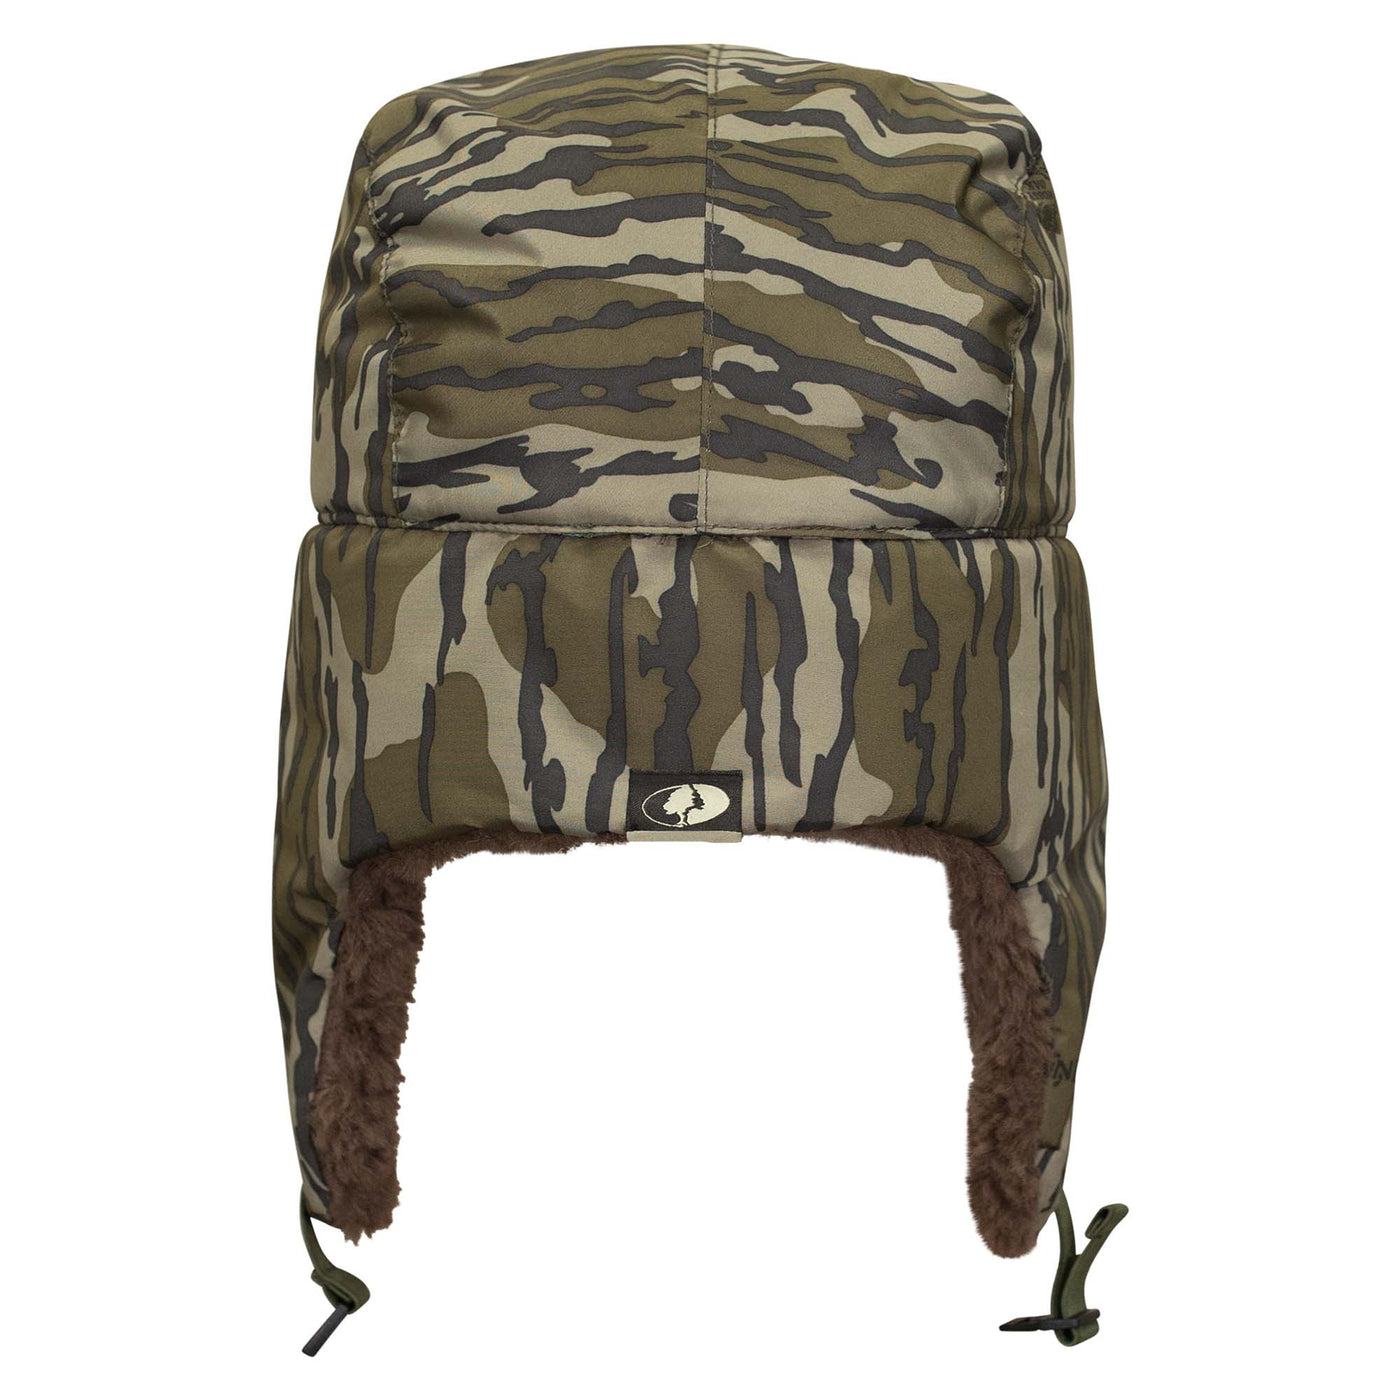 Billed Trapper Hat | Ghost Military Camo